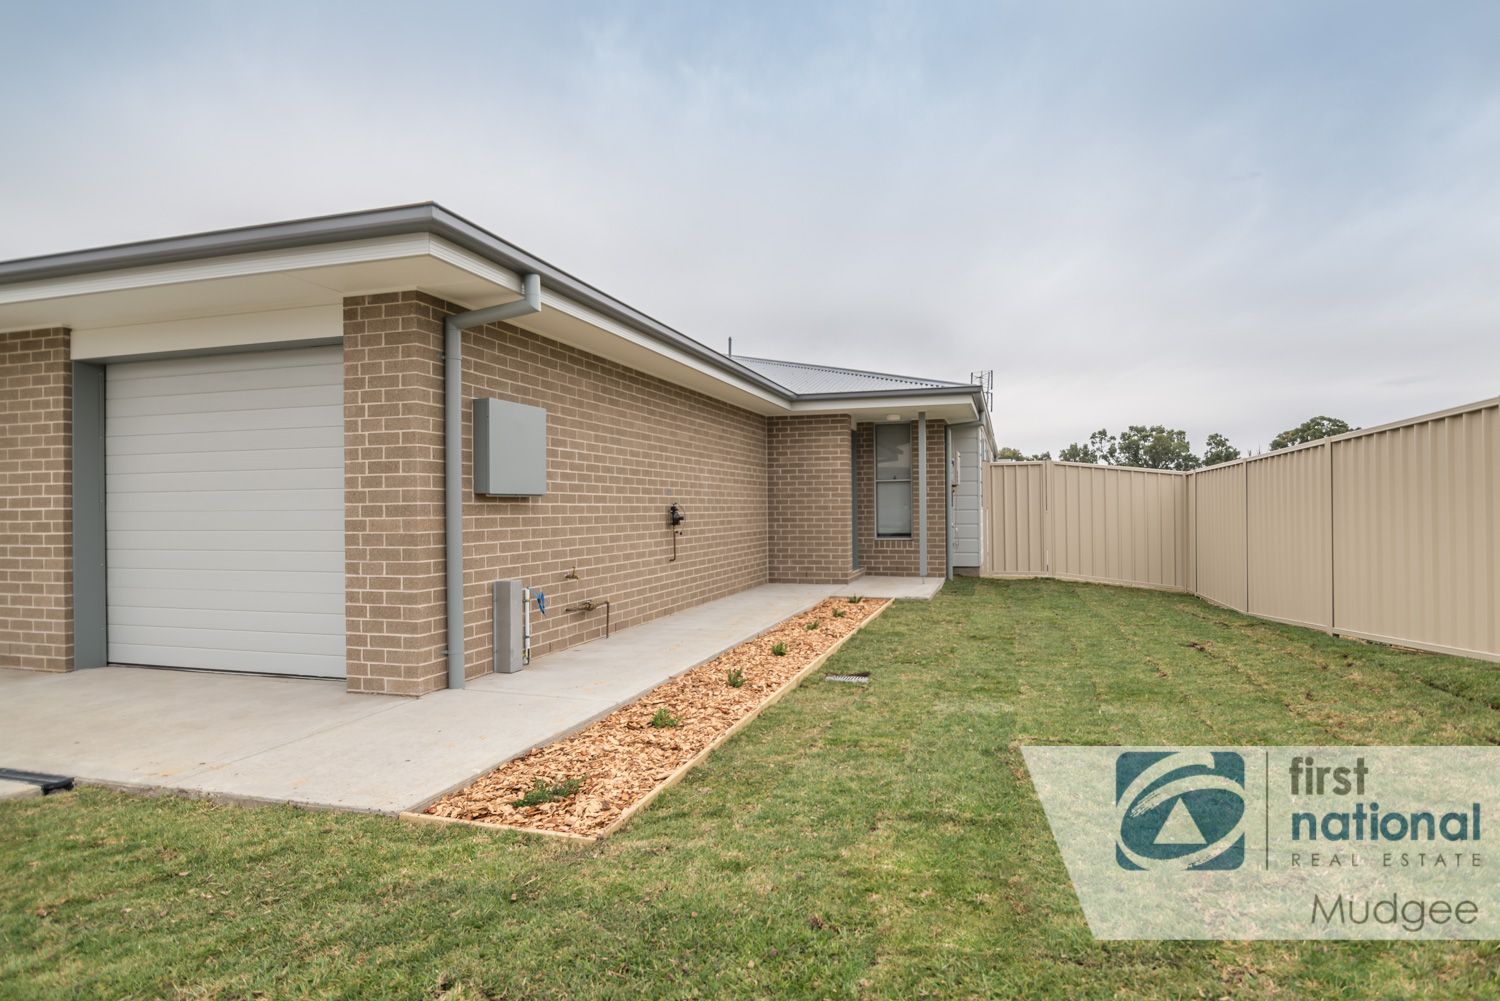 2 bedrooms House in 3a Pirie Close MUDGEE NSW, 2850